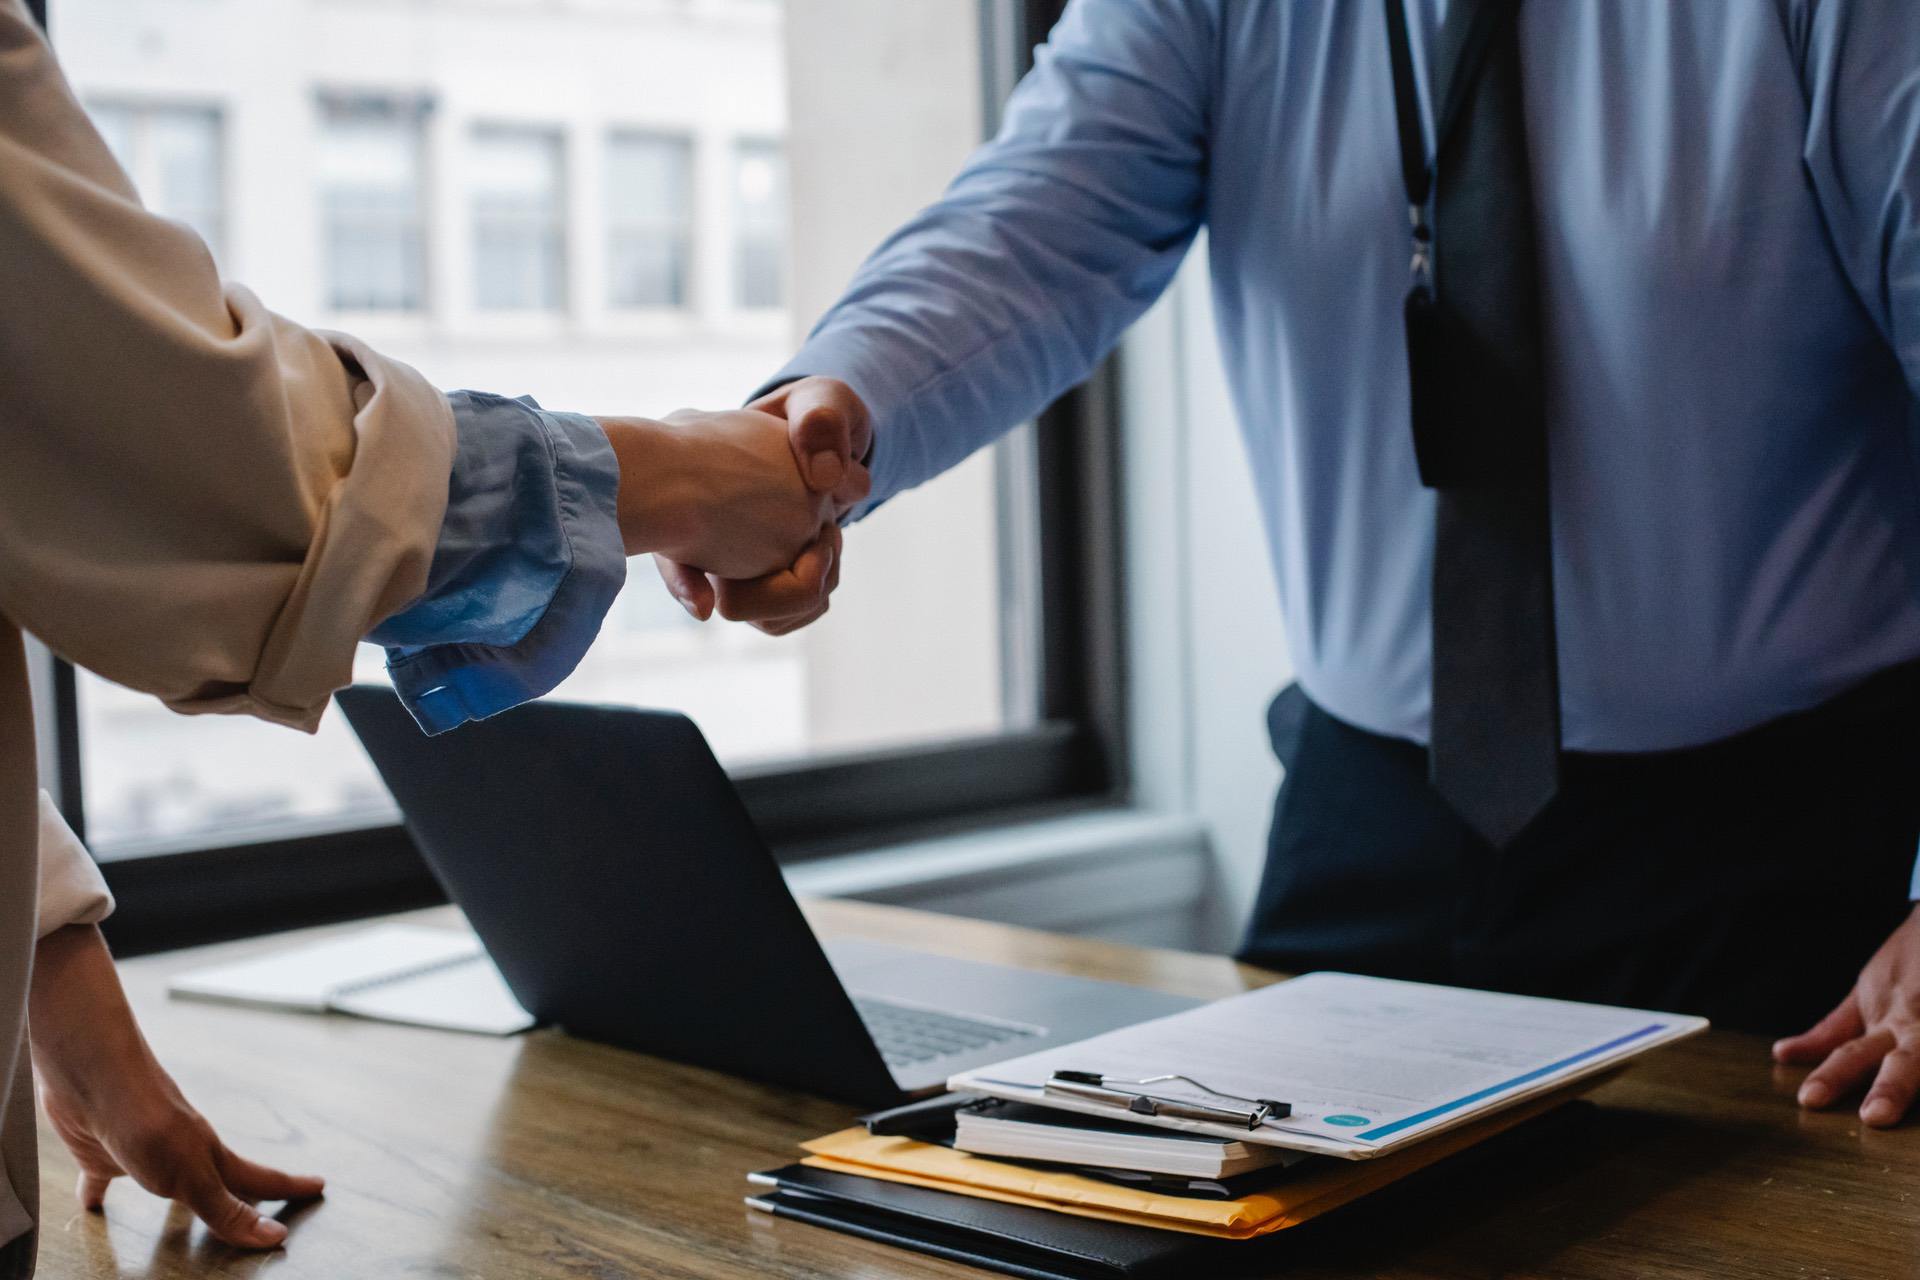 Insurance agent shaking hands with client after agreeing on policy